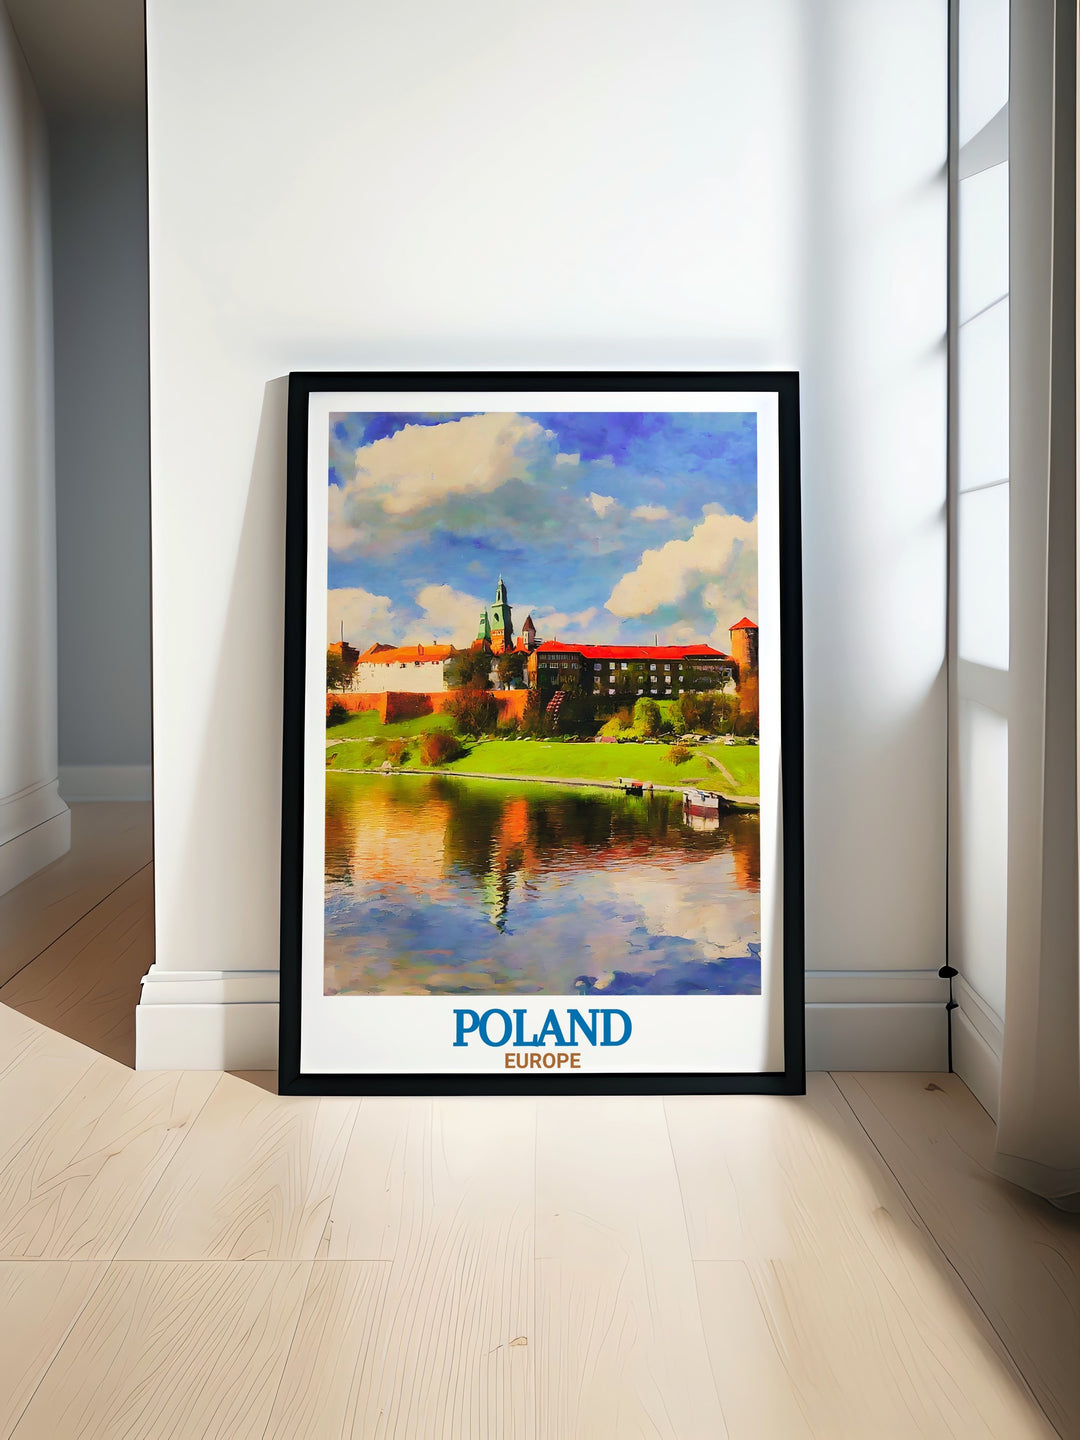 Poland Poster featuring Wawel Castle and Zakopanes breathtaking landscapes perfect for travel lovers and art enthusiasts makes a beautiful addition to any home decor ideal as a personalized gift or for special occasions like anniversaries or birthdays